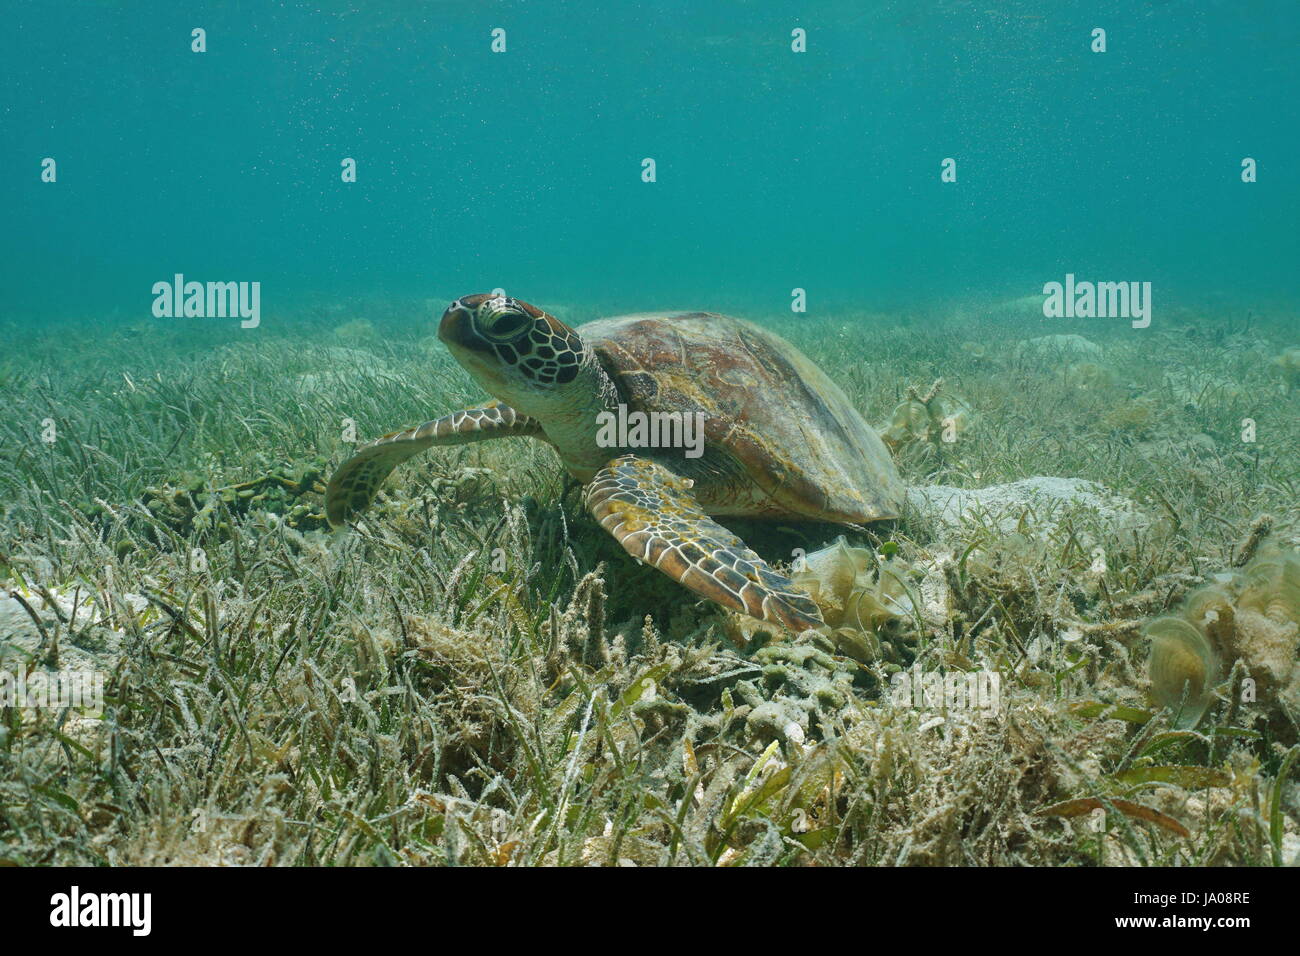 Under water green sea turtle, Chelonia mydas, on a grassy seabed, south Pacific ocean, lagoon of Grand-Terre island in New Caledonia, Oceania Stock Photo